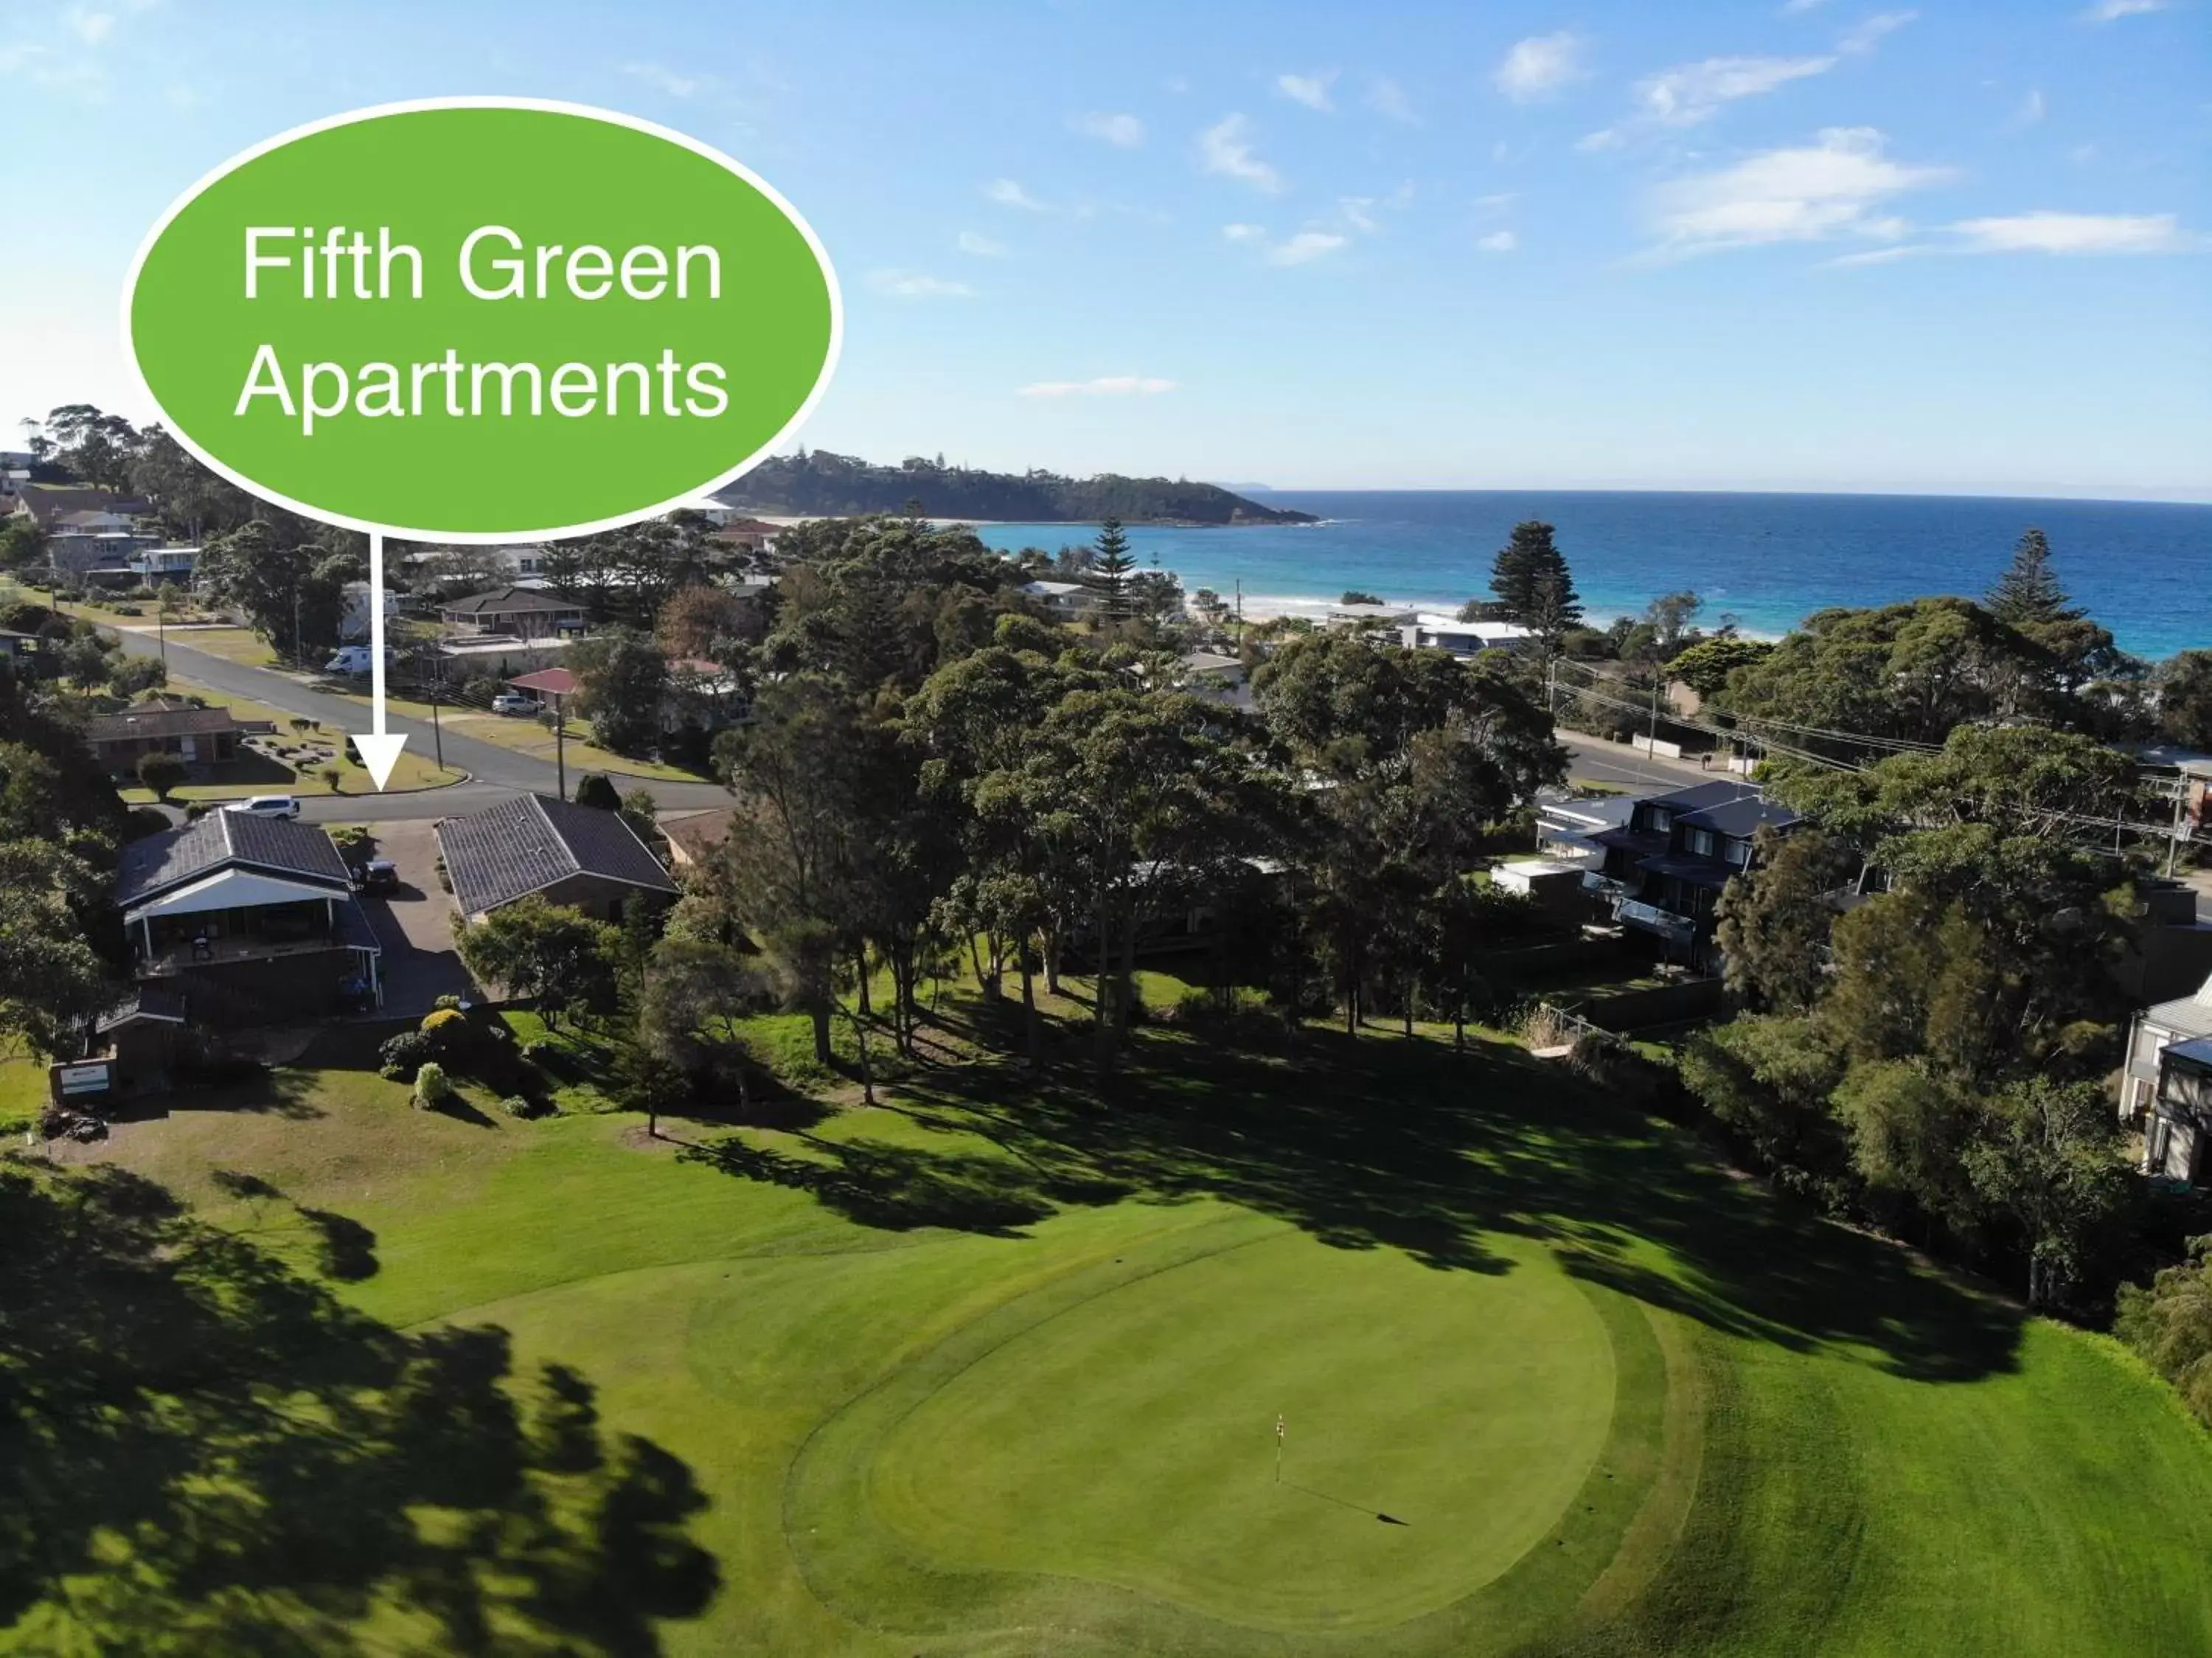 Bird's eye view in Dolphins of Mollymook Motel and Fifth Green Apartments